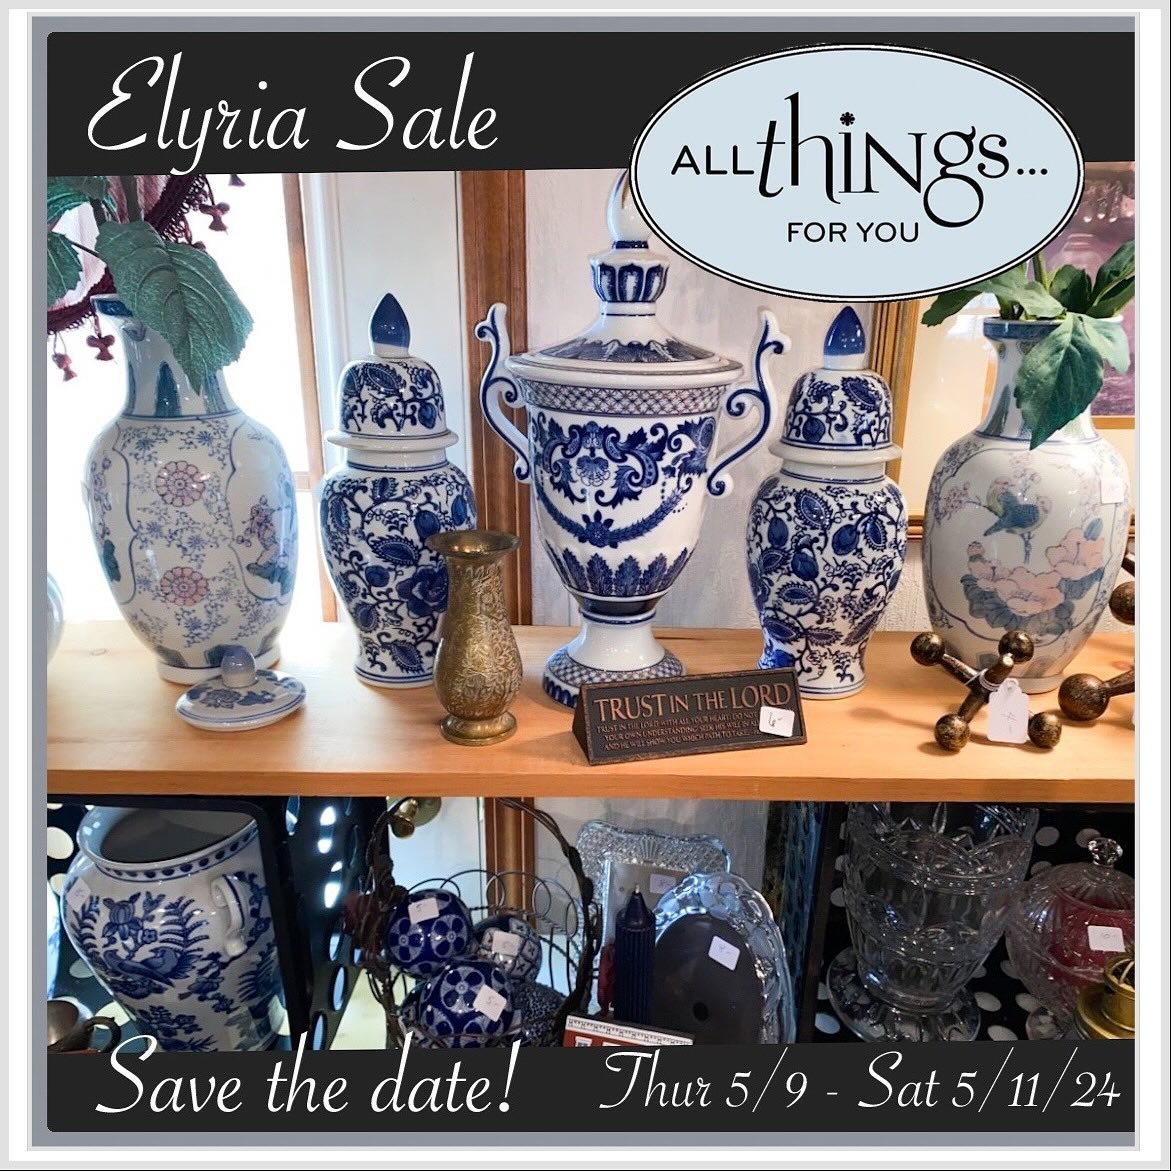 Save the date for this latest and greatest upcoming estate sale extravaganza! So much awesomeness it will be a multi-week sale in 44035! (Thur 5/9-Sat 5/11/24) Address will be available after 9am on Wed 5/8/24.) Don&rsquo;t miss Part 1 of this Elyria